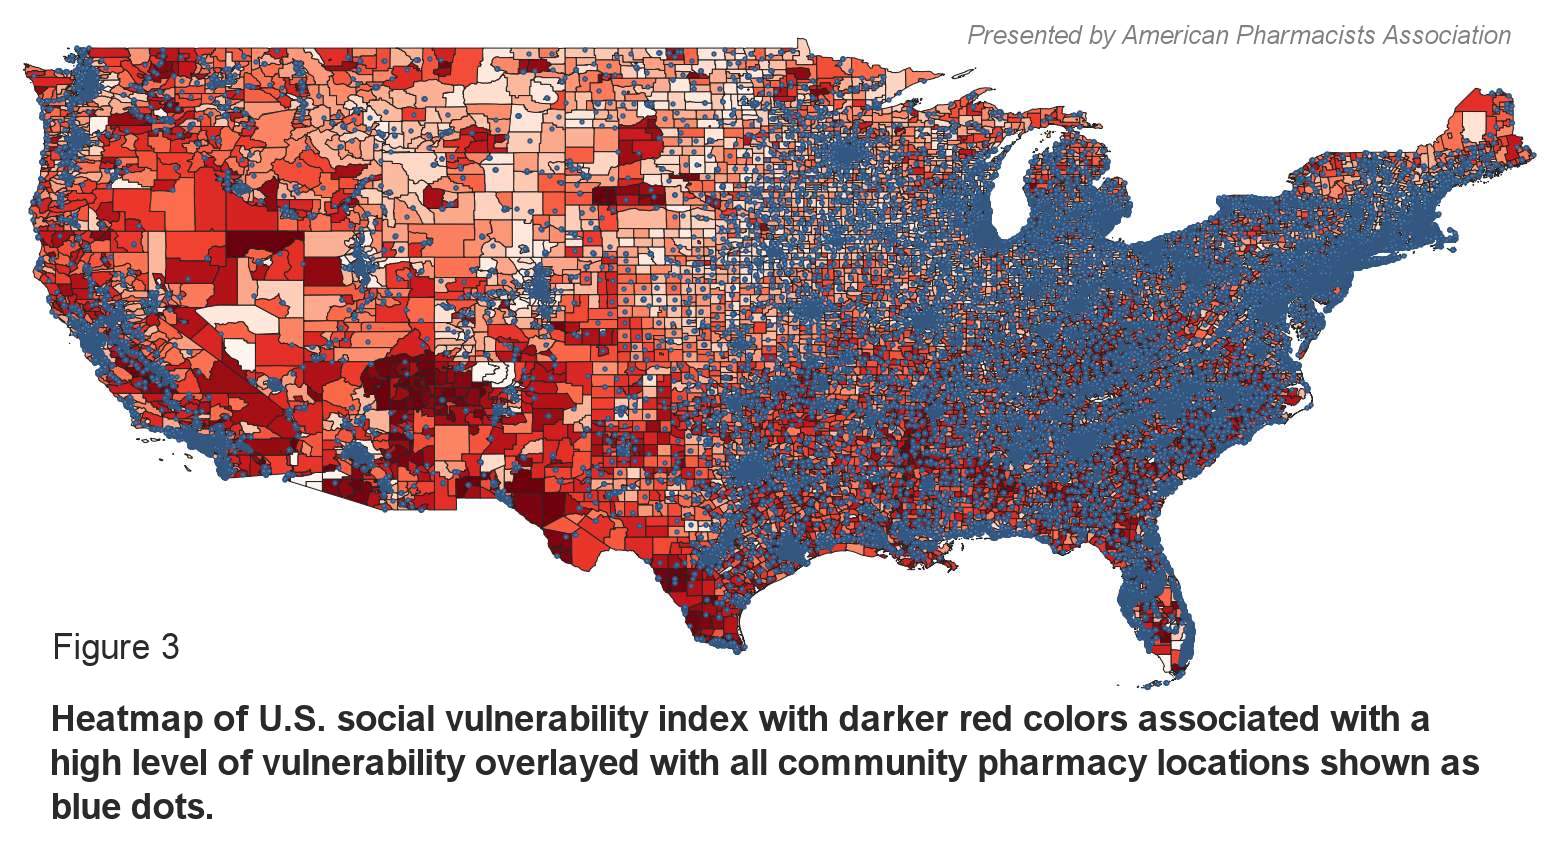 Figure 3: Heatmap of U.S. social vulnerability index with darker red colors associated with a high level of vulnerability overlayed with all community pharmacy locations shown as blue dots.